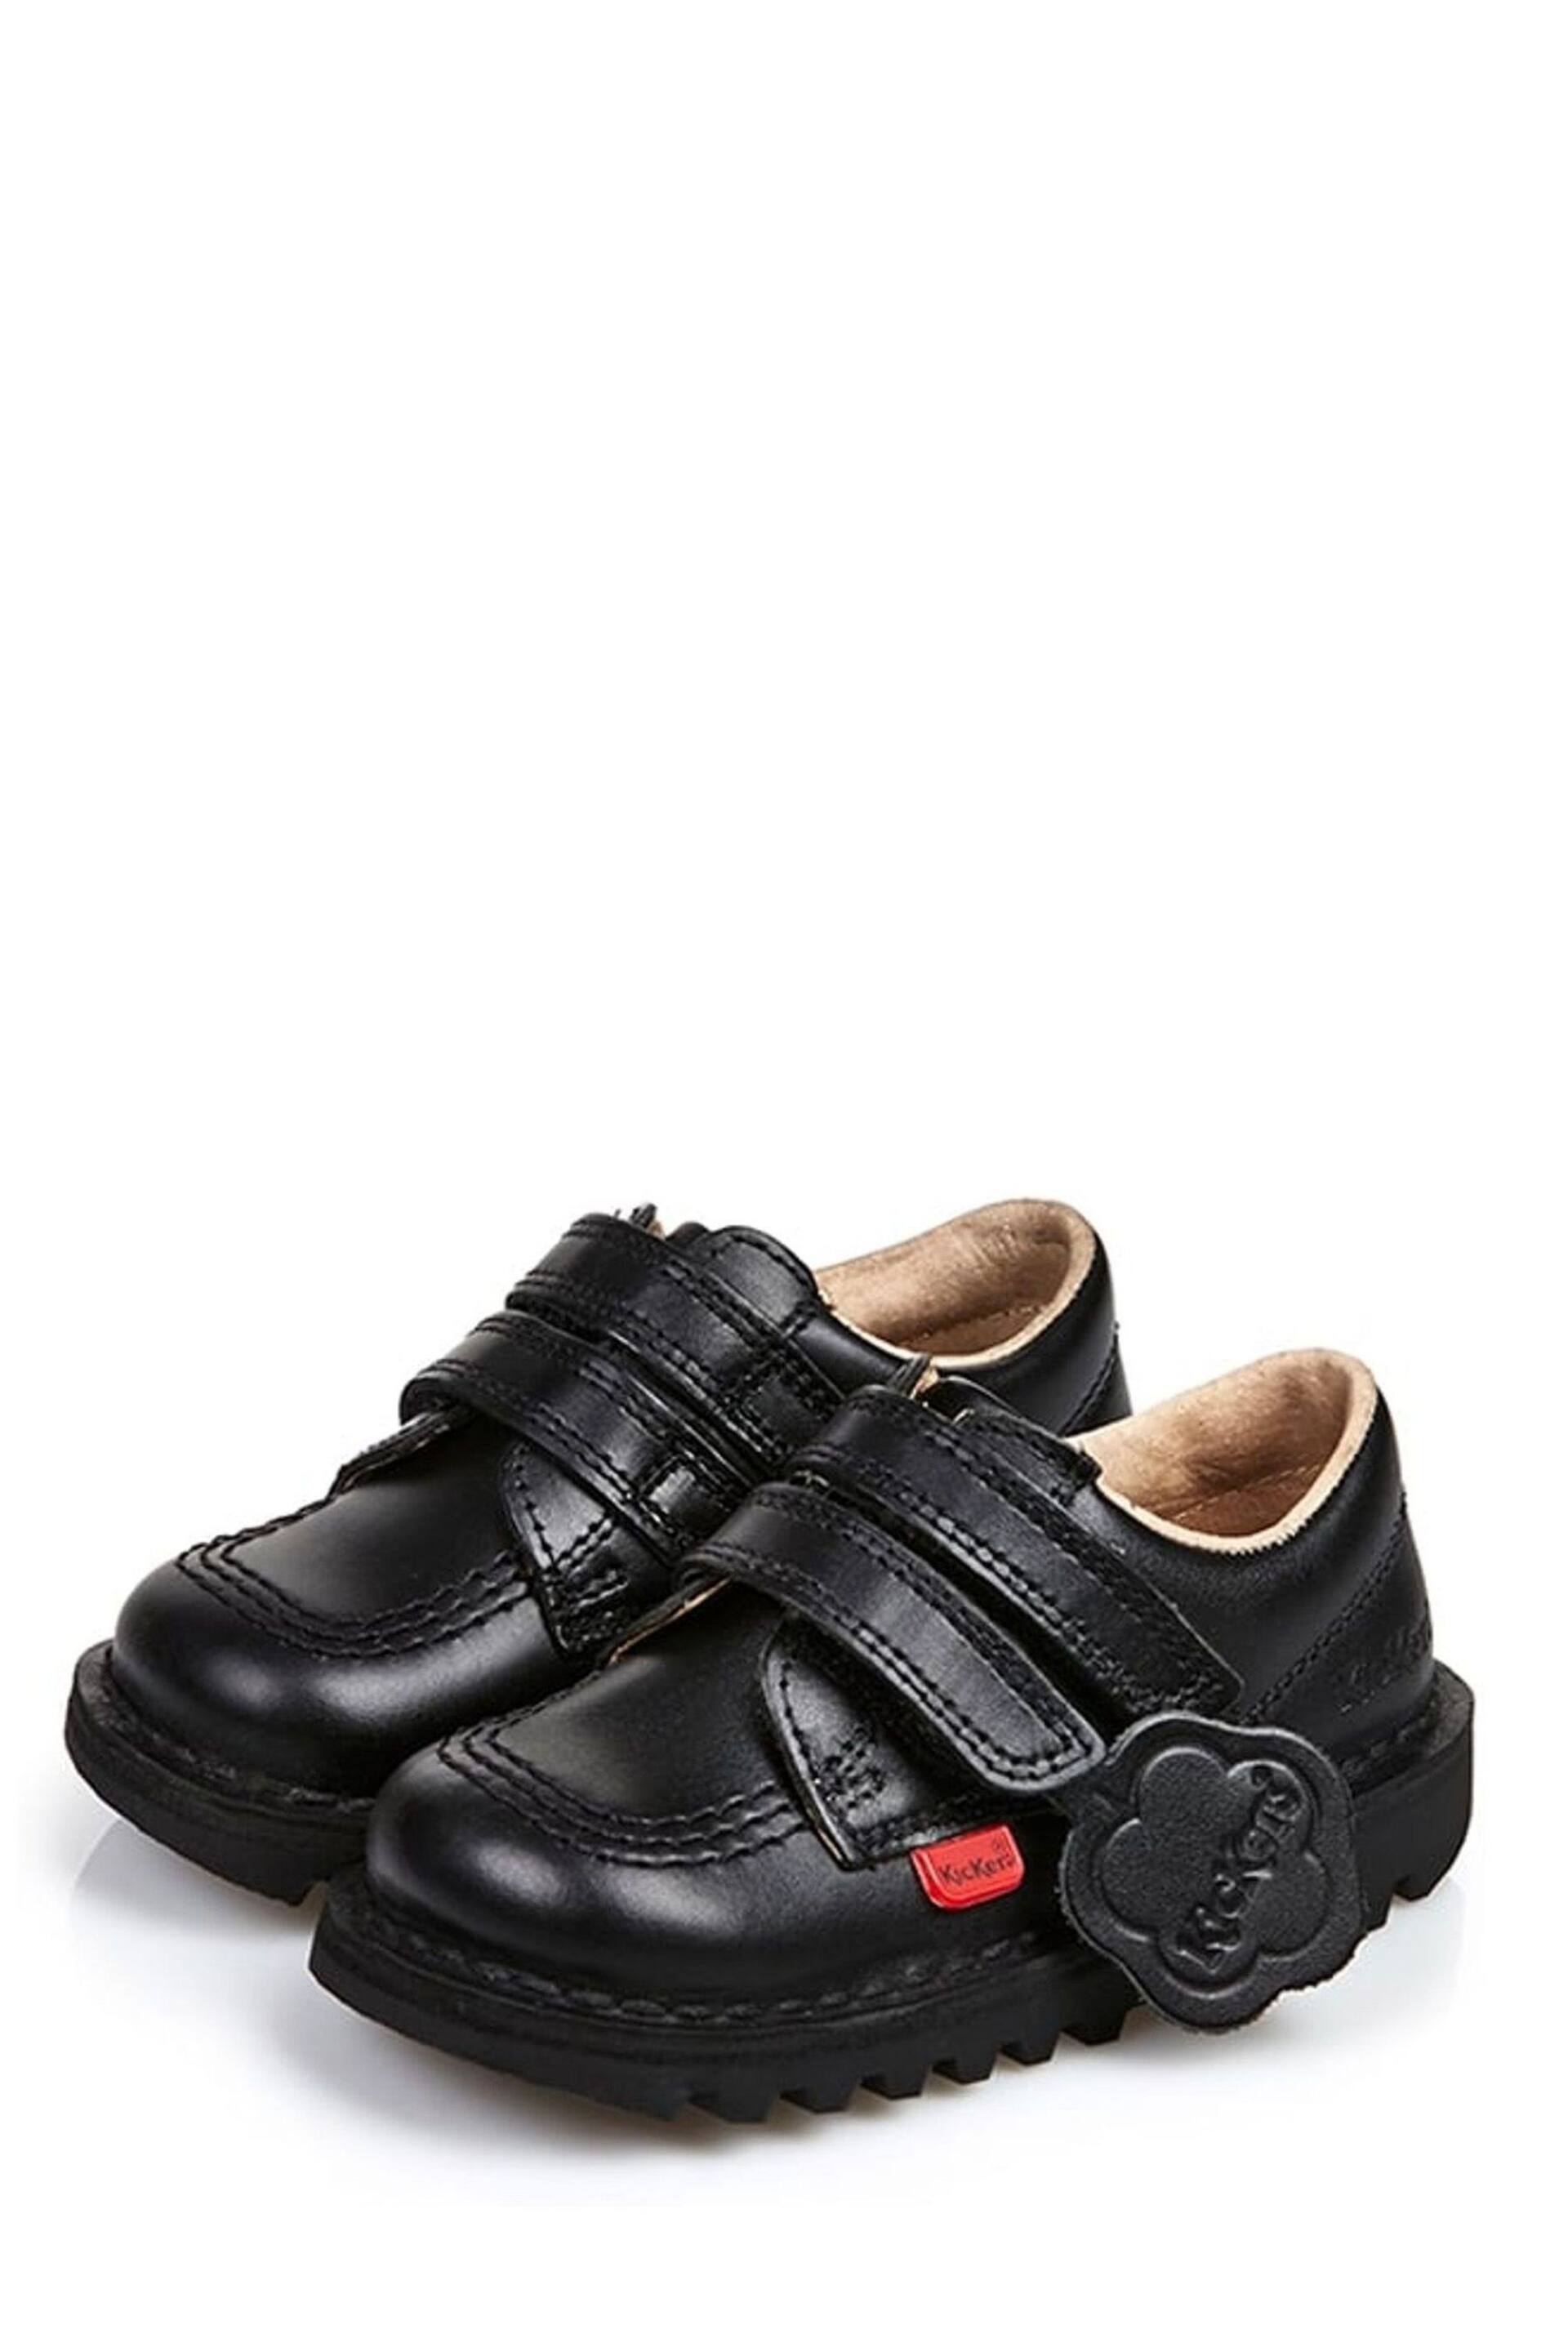 Kickers Junior Kick Lo Hook and Loop Leather Shoes - Image 3 of 6